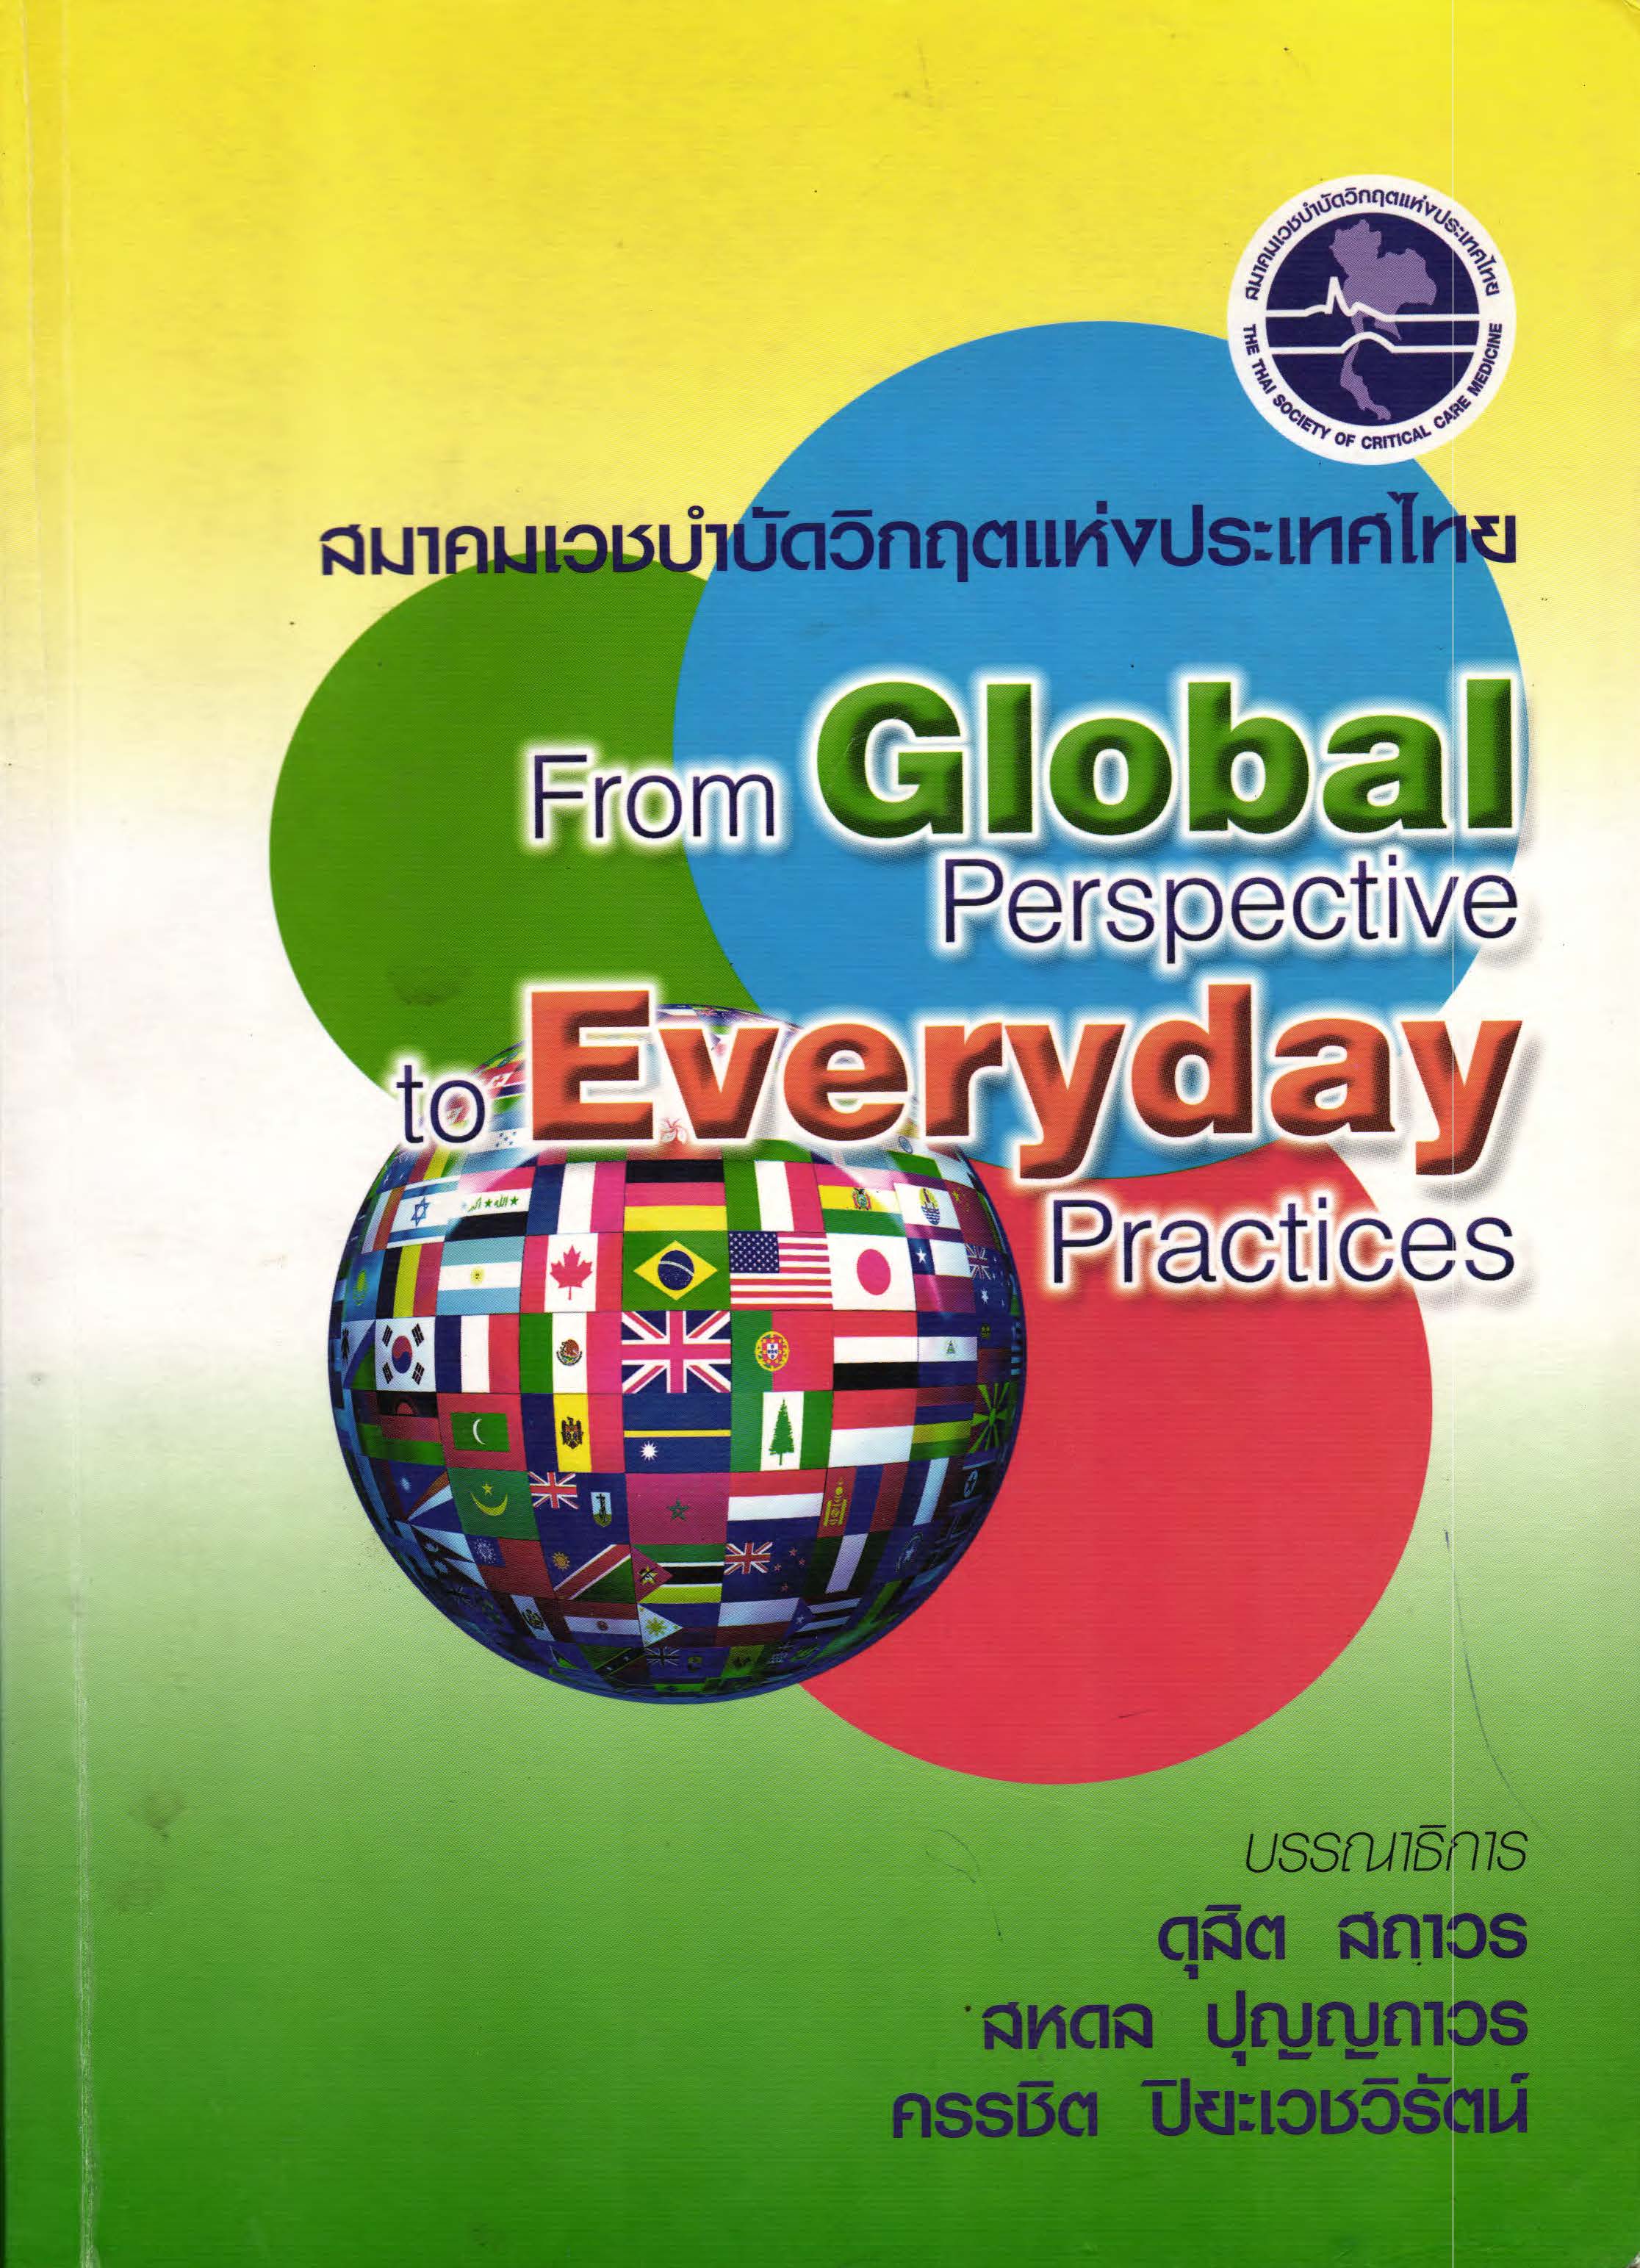 From global perspective to everyday practices